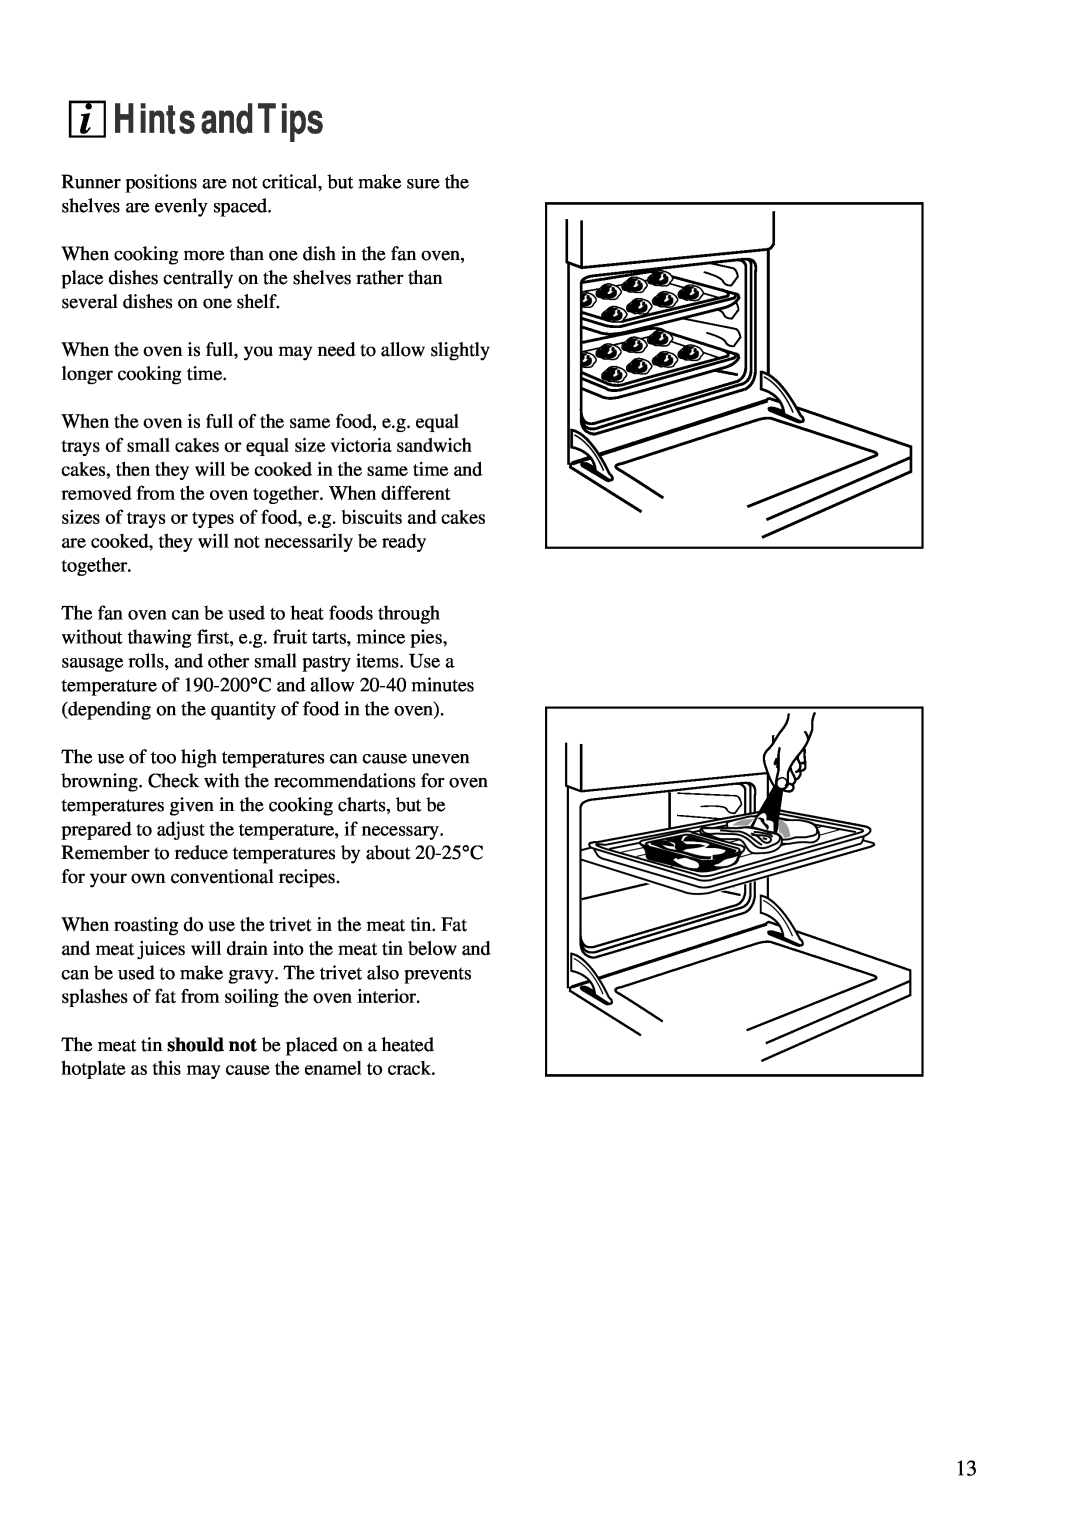 Zanussi ZBF 860 manual Hints andTips, Runner positions are not critical, but make sure the shelves are evenly spaced 